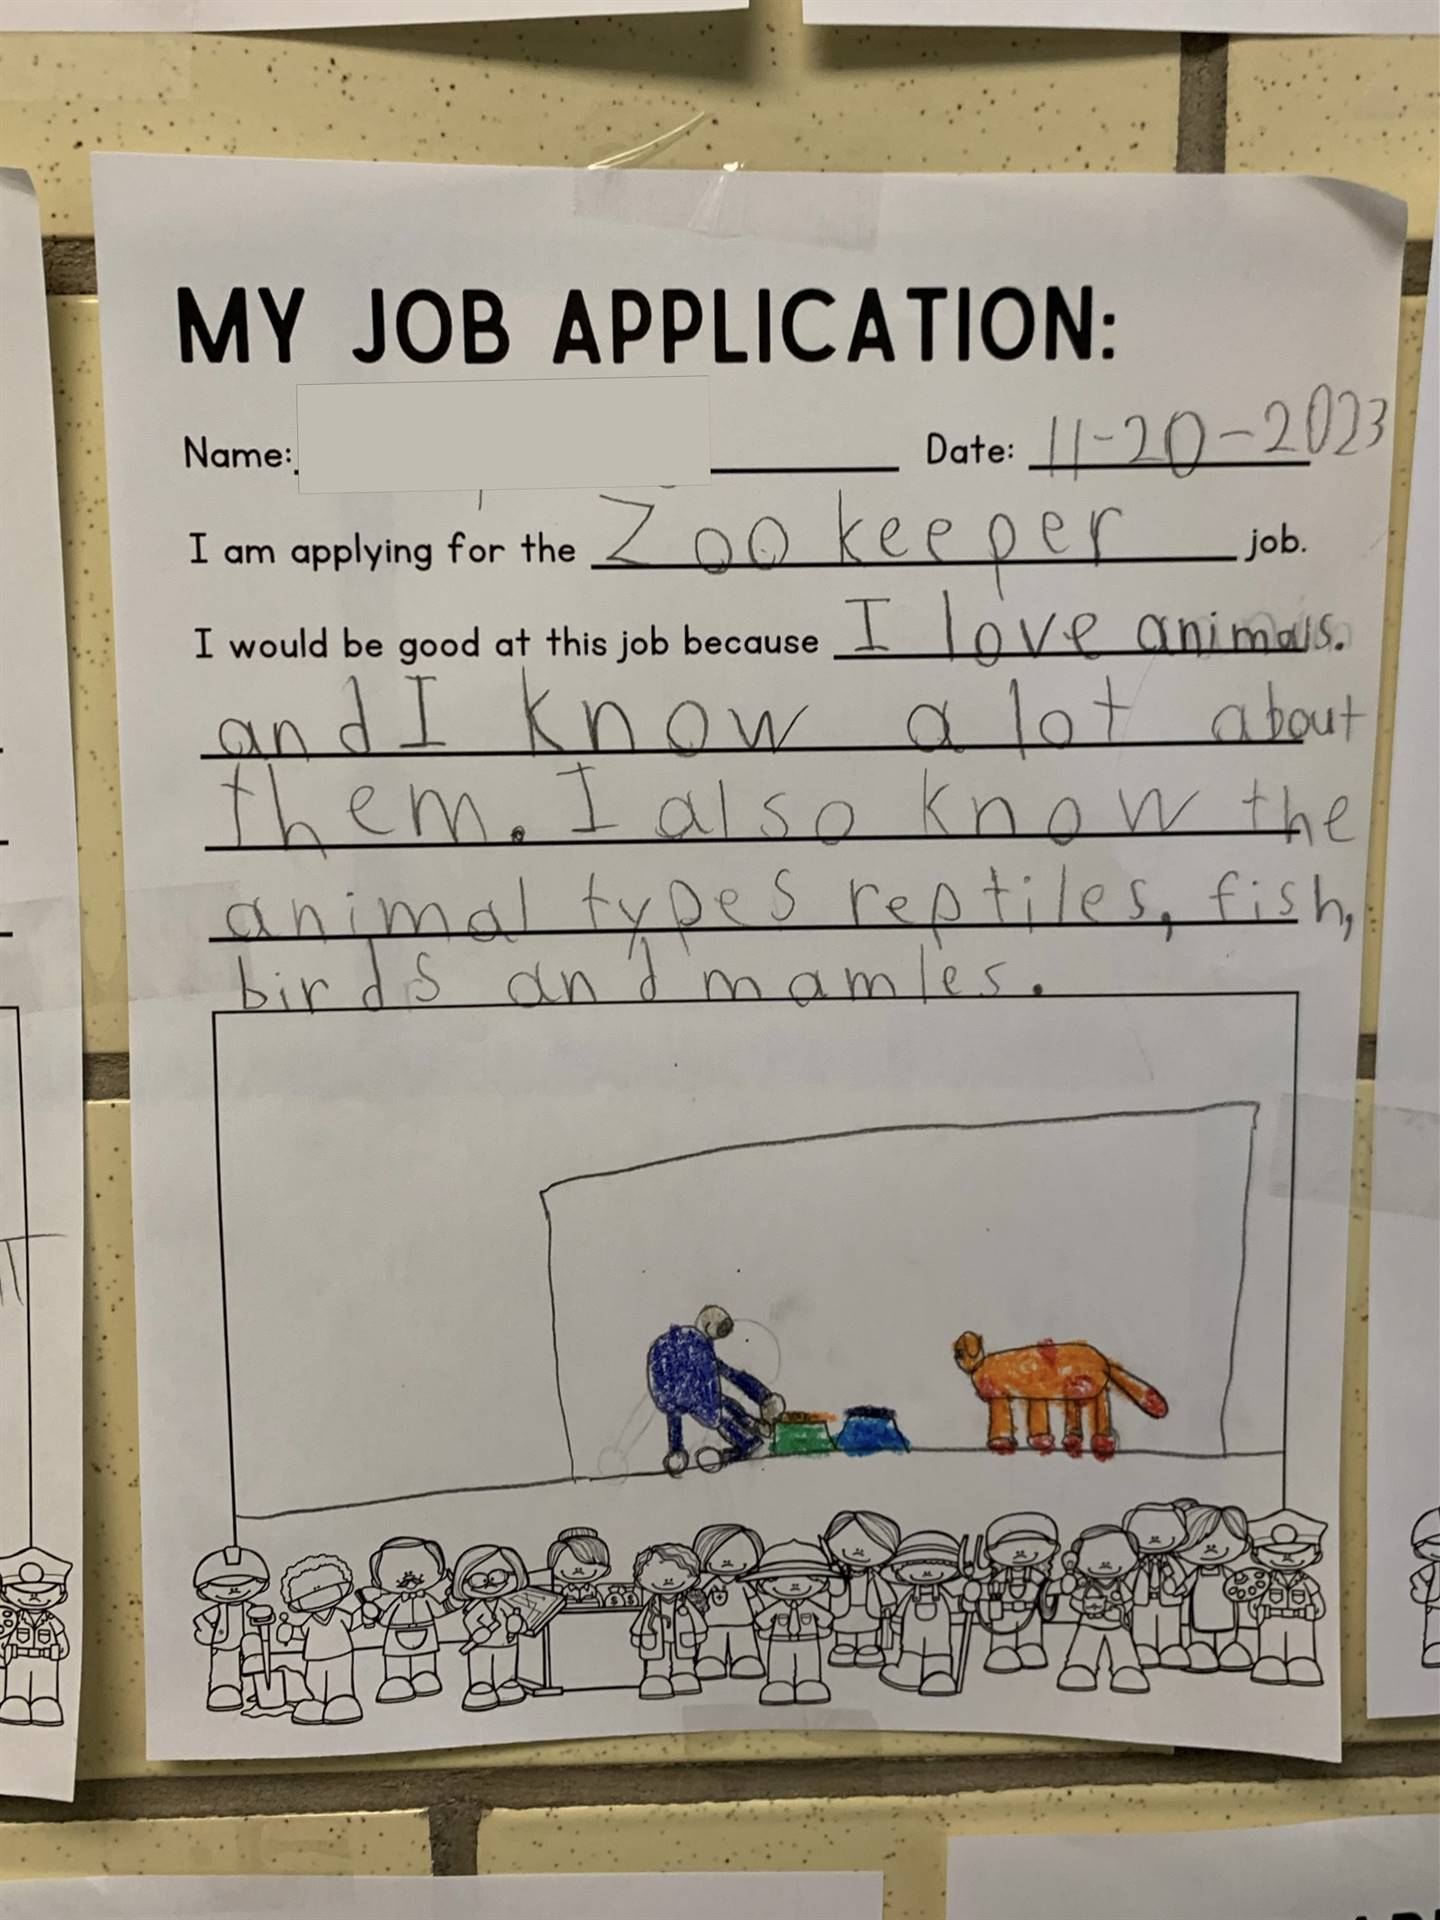 A 3rd grade job application for a zookeeper.